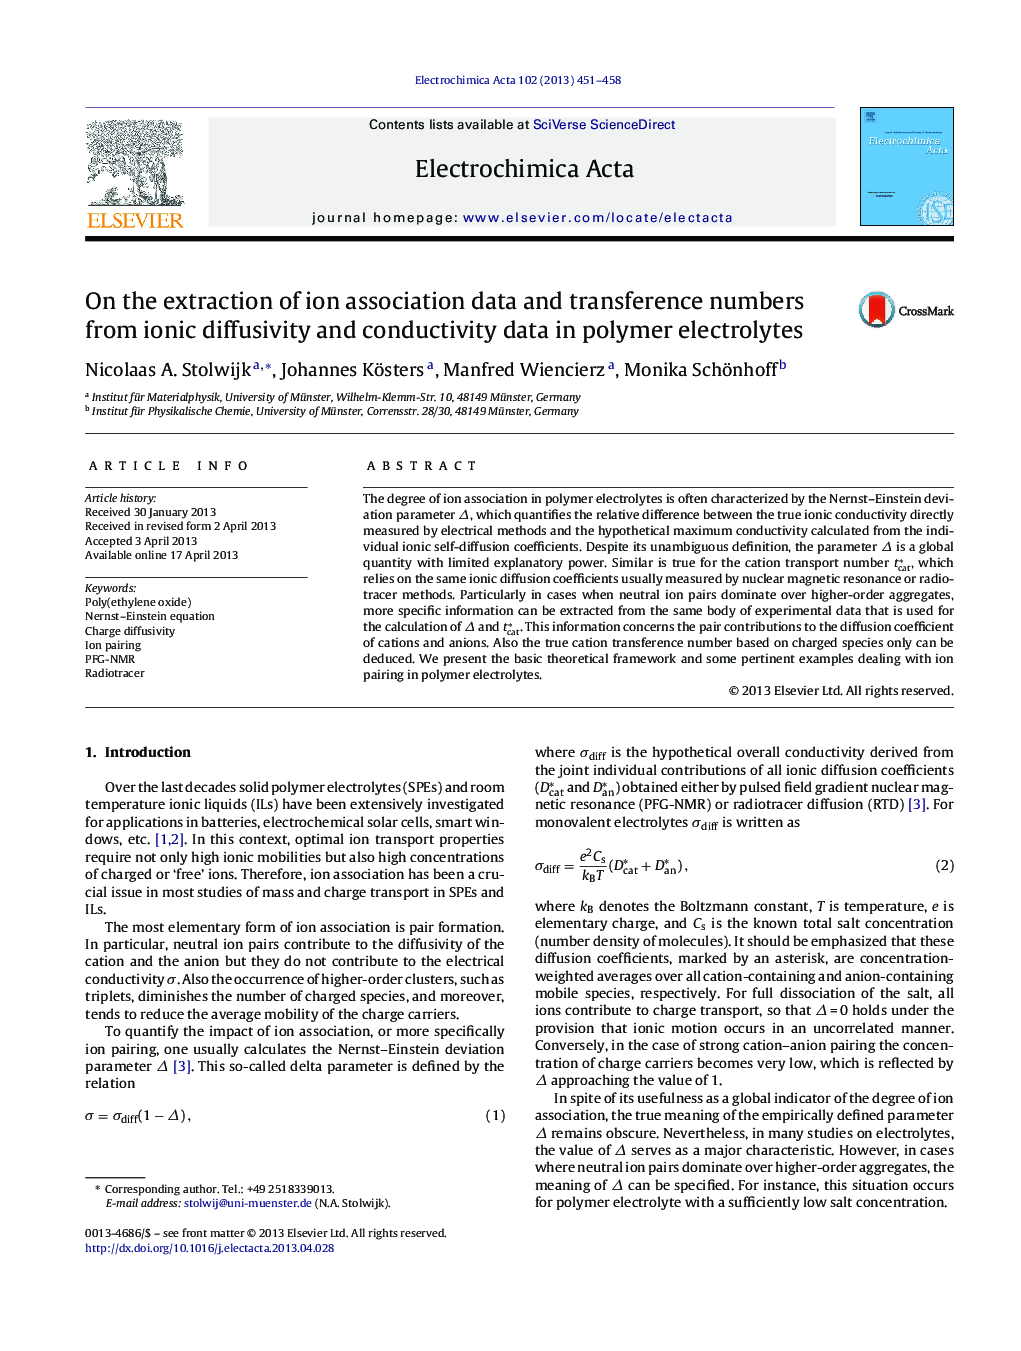 On the extraction of ion association data and transference numbers from ionic diffusivity and conductivity data in polymer electrolytes